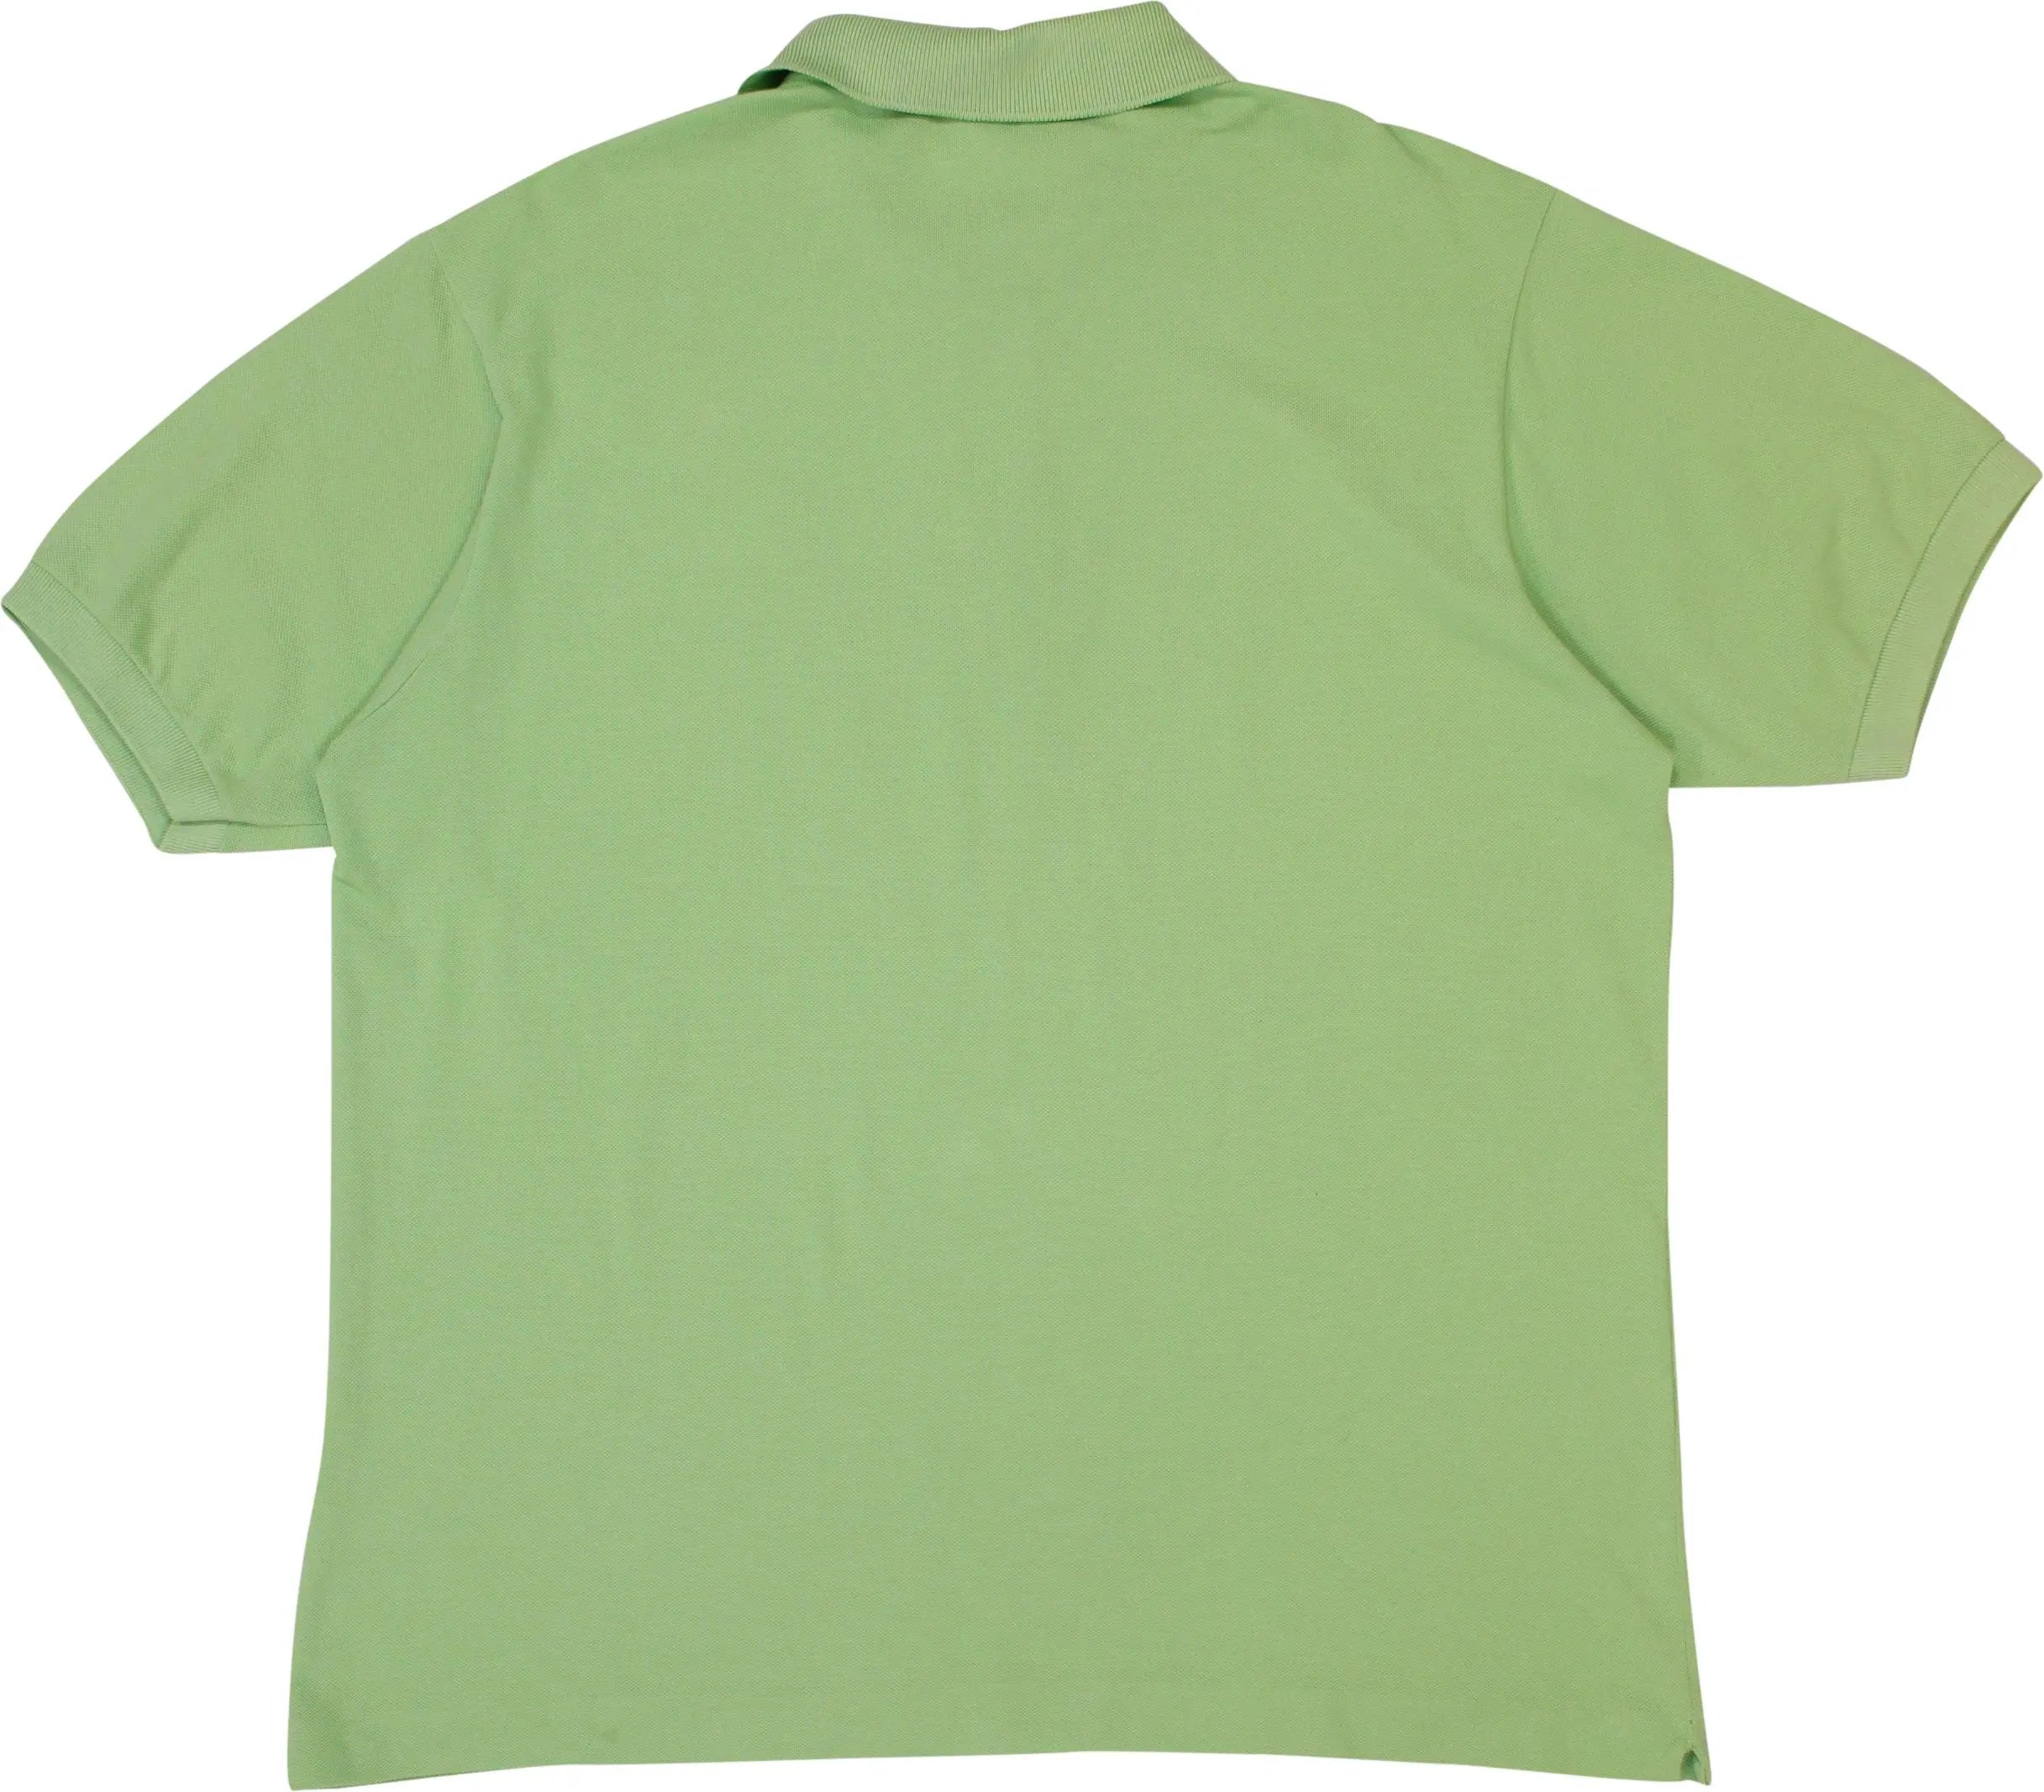 Lacoste - Green Polo Shirt by Lacoste- ThriftTale.com - Vintage and second handclothing